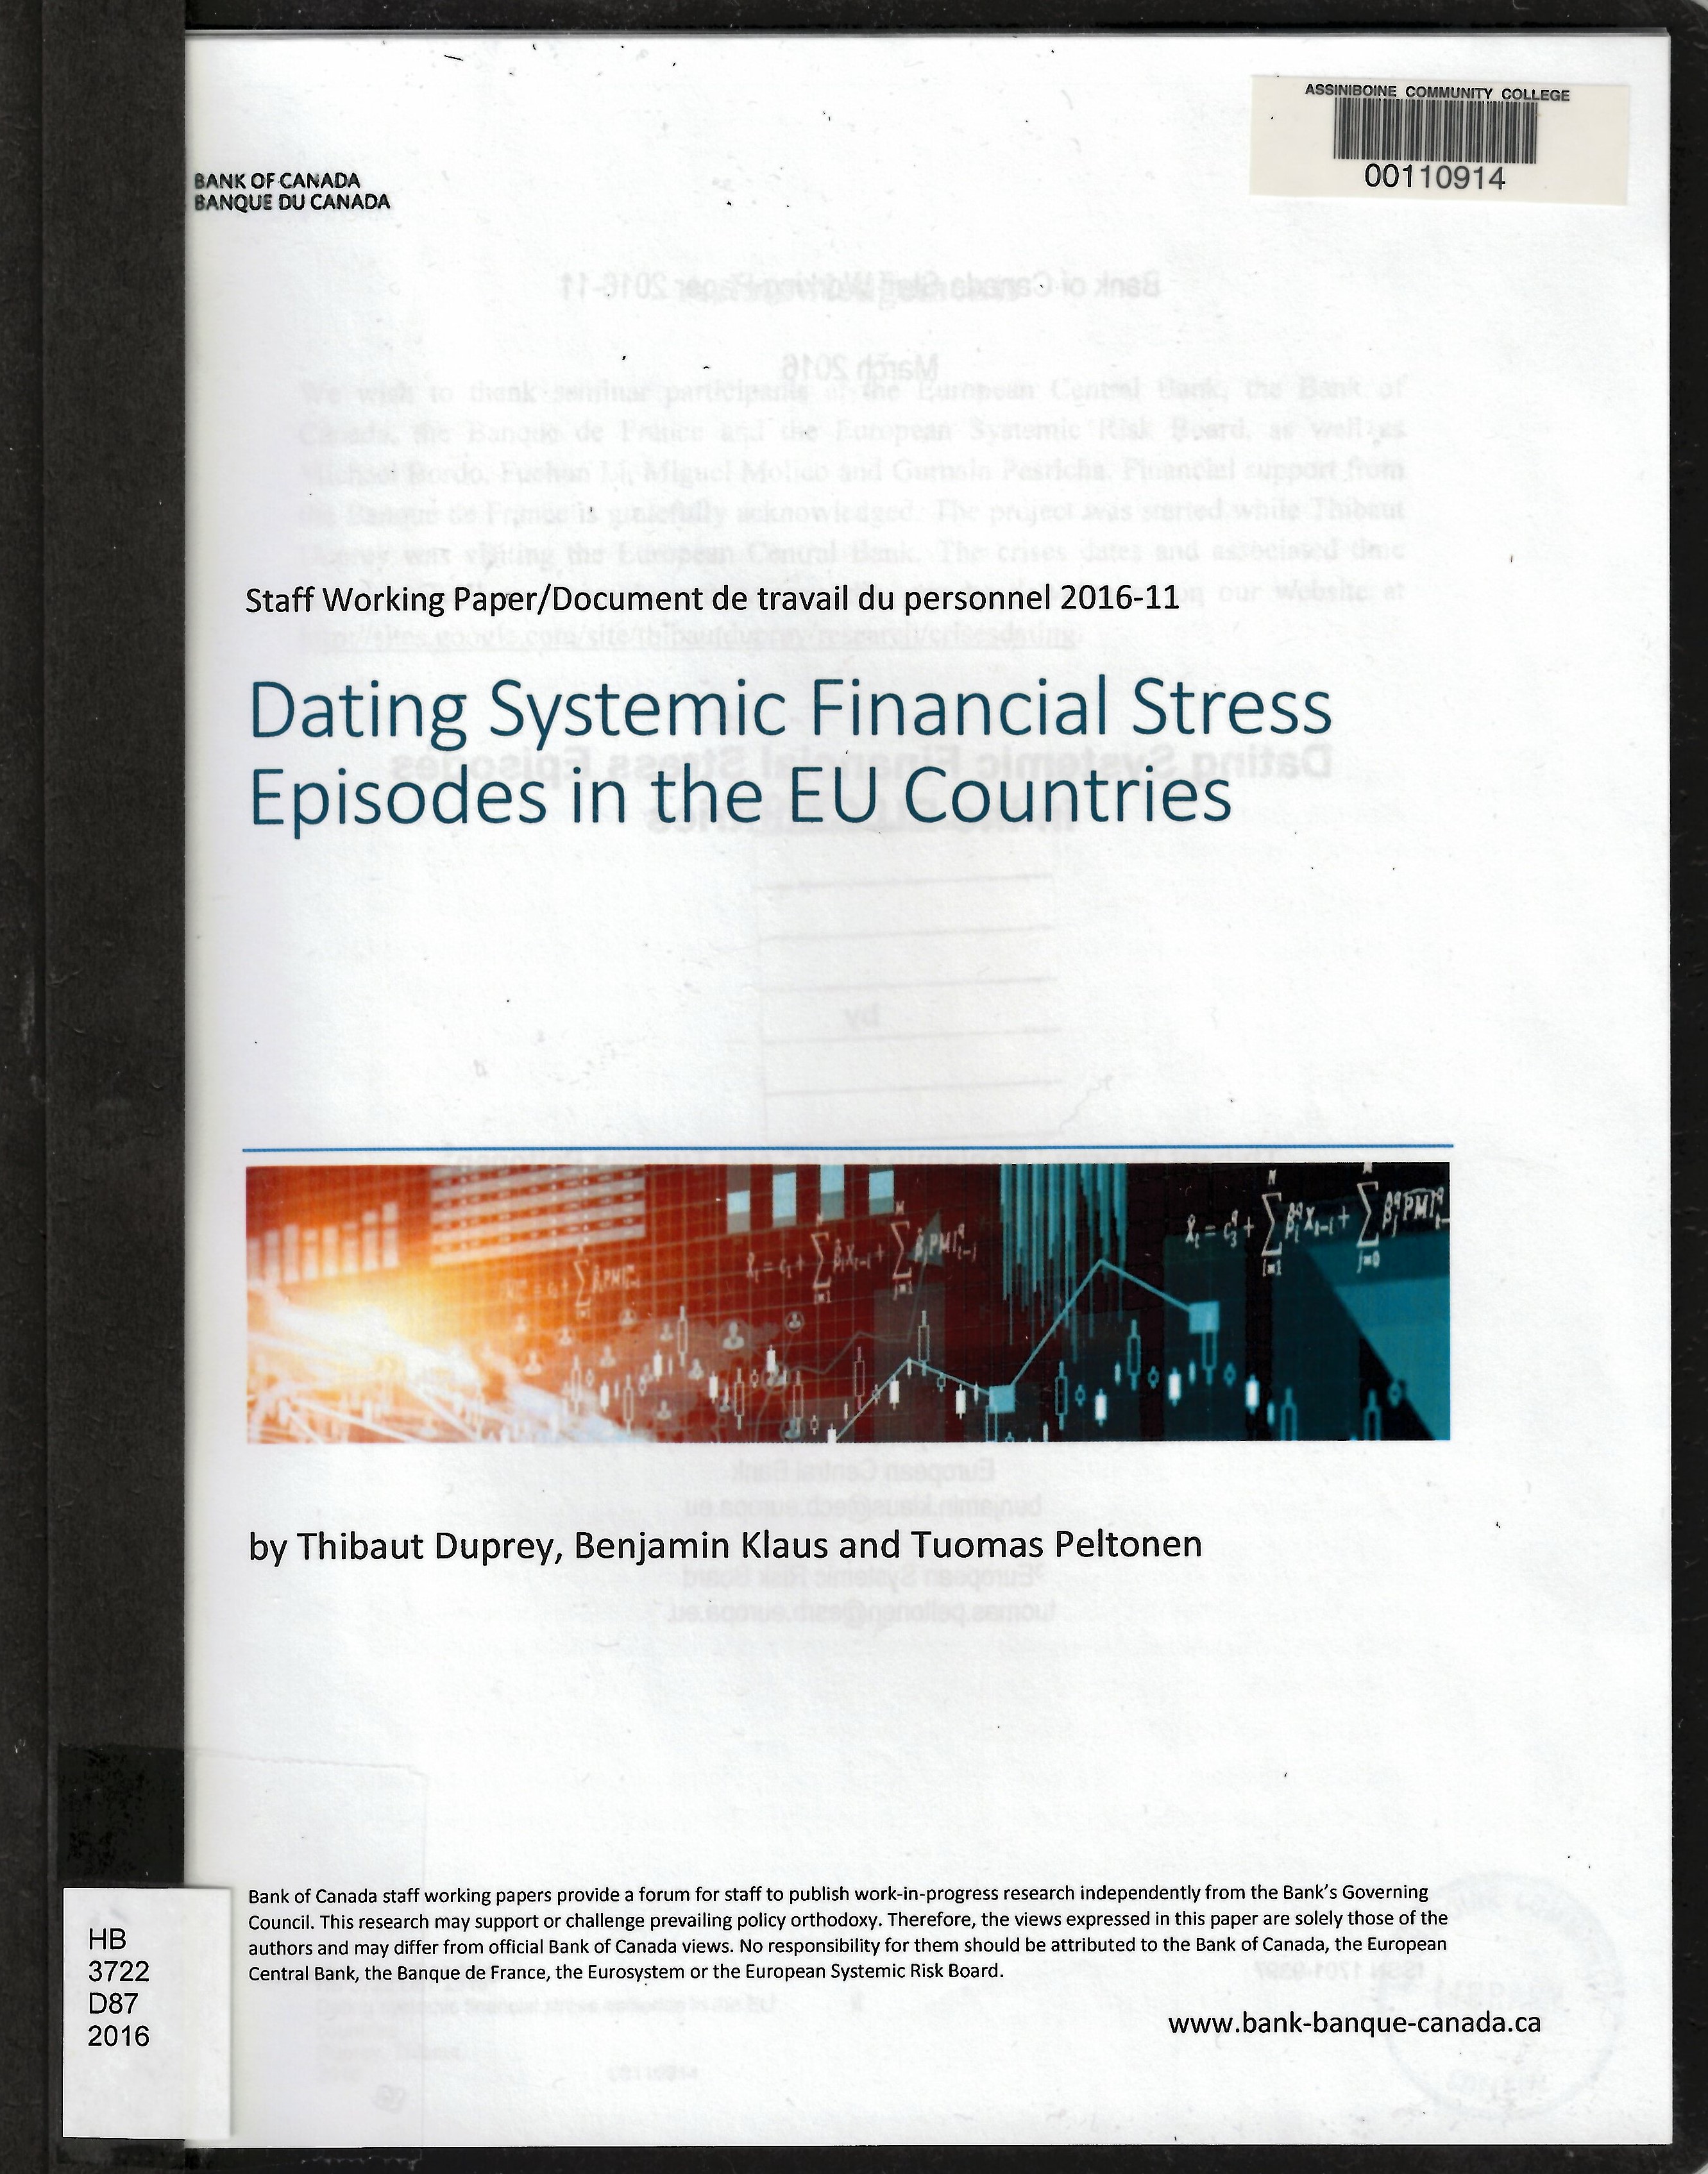 Dating systemic financial stress episodes in the EU countries